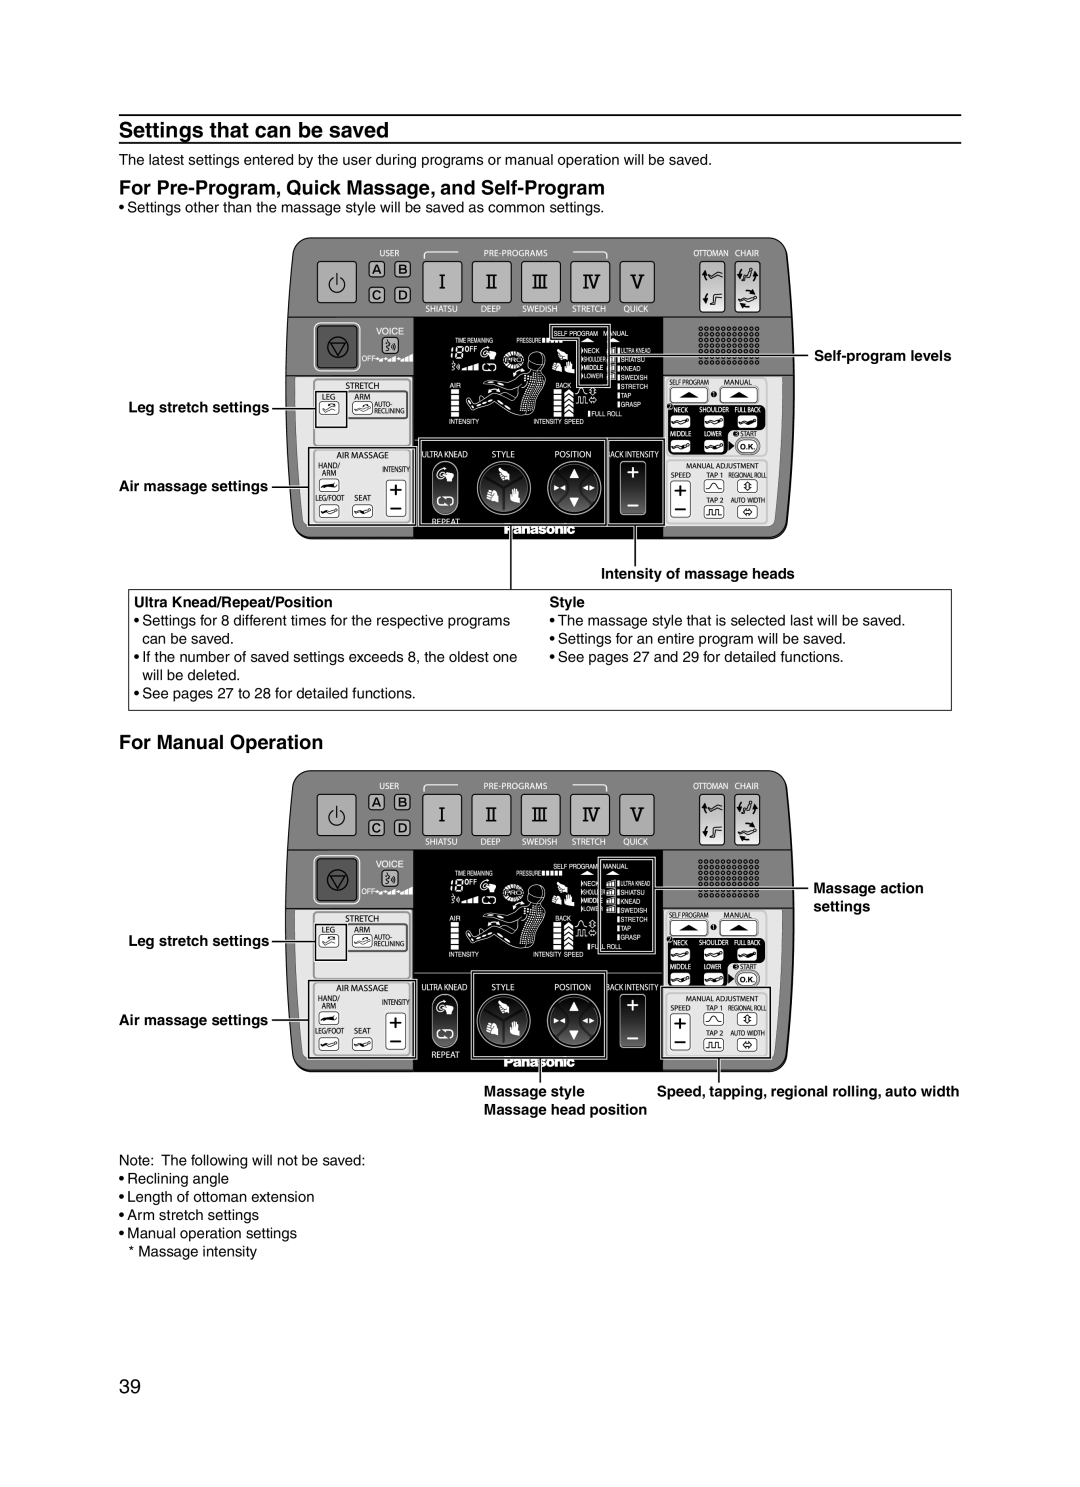 Panasonic EP30004 manual Settings that can be saved, For Pre-Program,Quick Massage, and Self-Program, For Manual Operation 